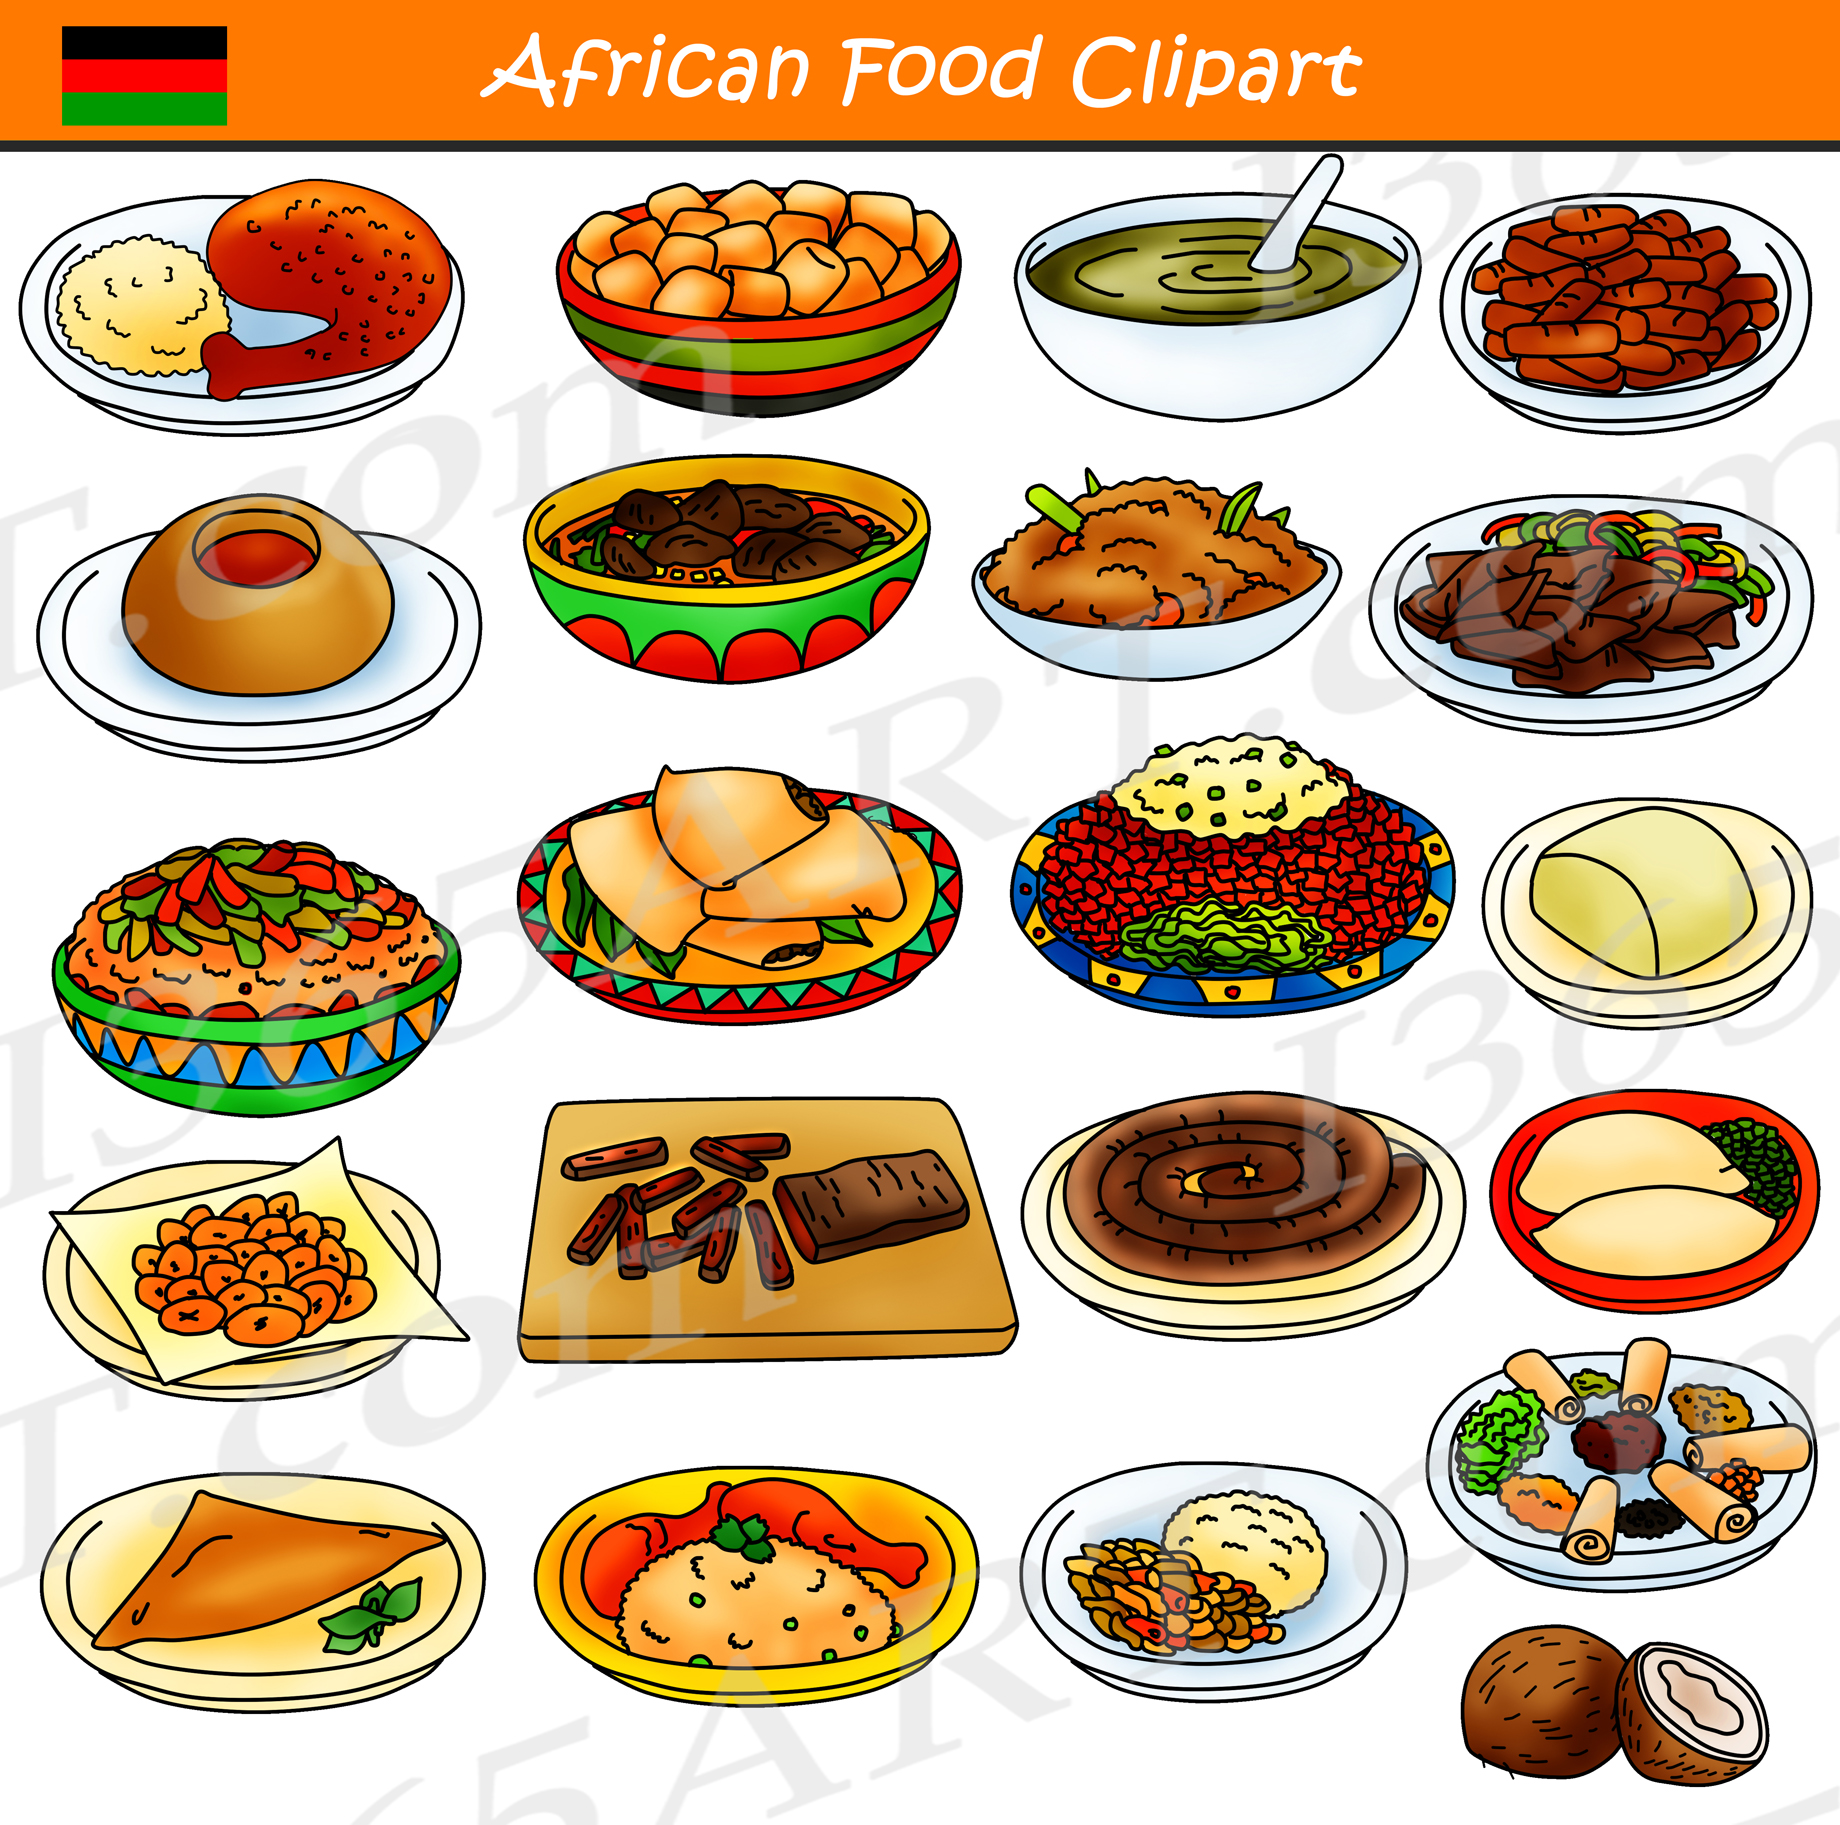 African Food Clipart Commercial Download.